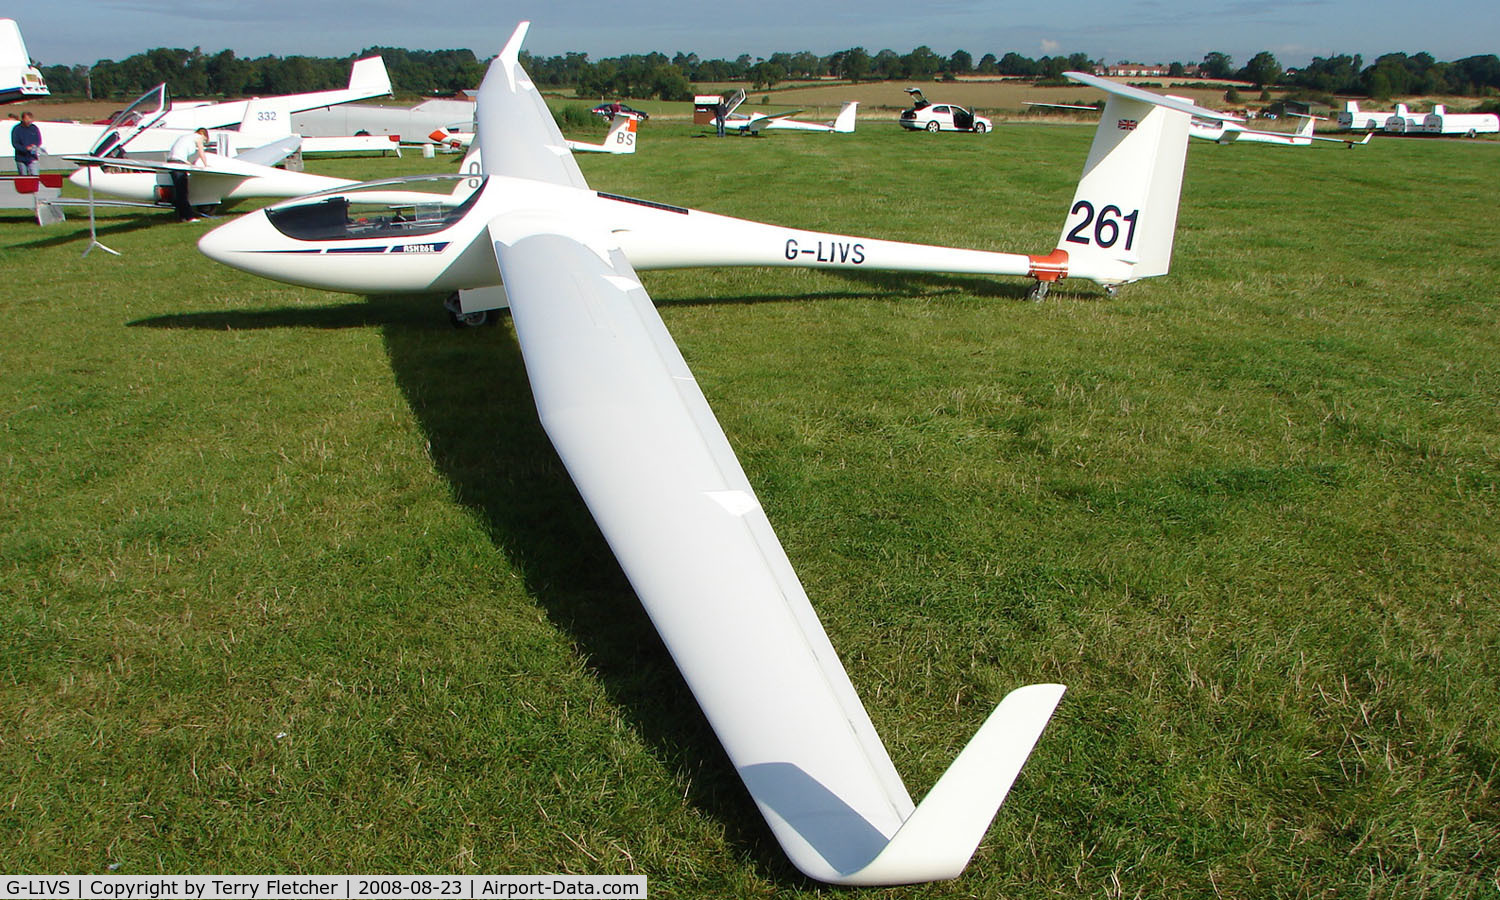 G-LIVS, 2005 Schleicher ASH-26E C/N 26228, Competitor in the Midland Regional Gliding Championship at Husband's Bosworth